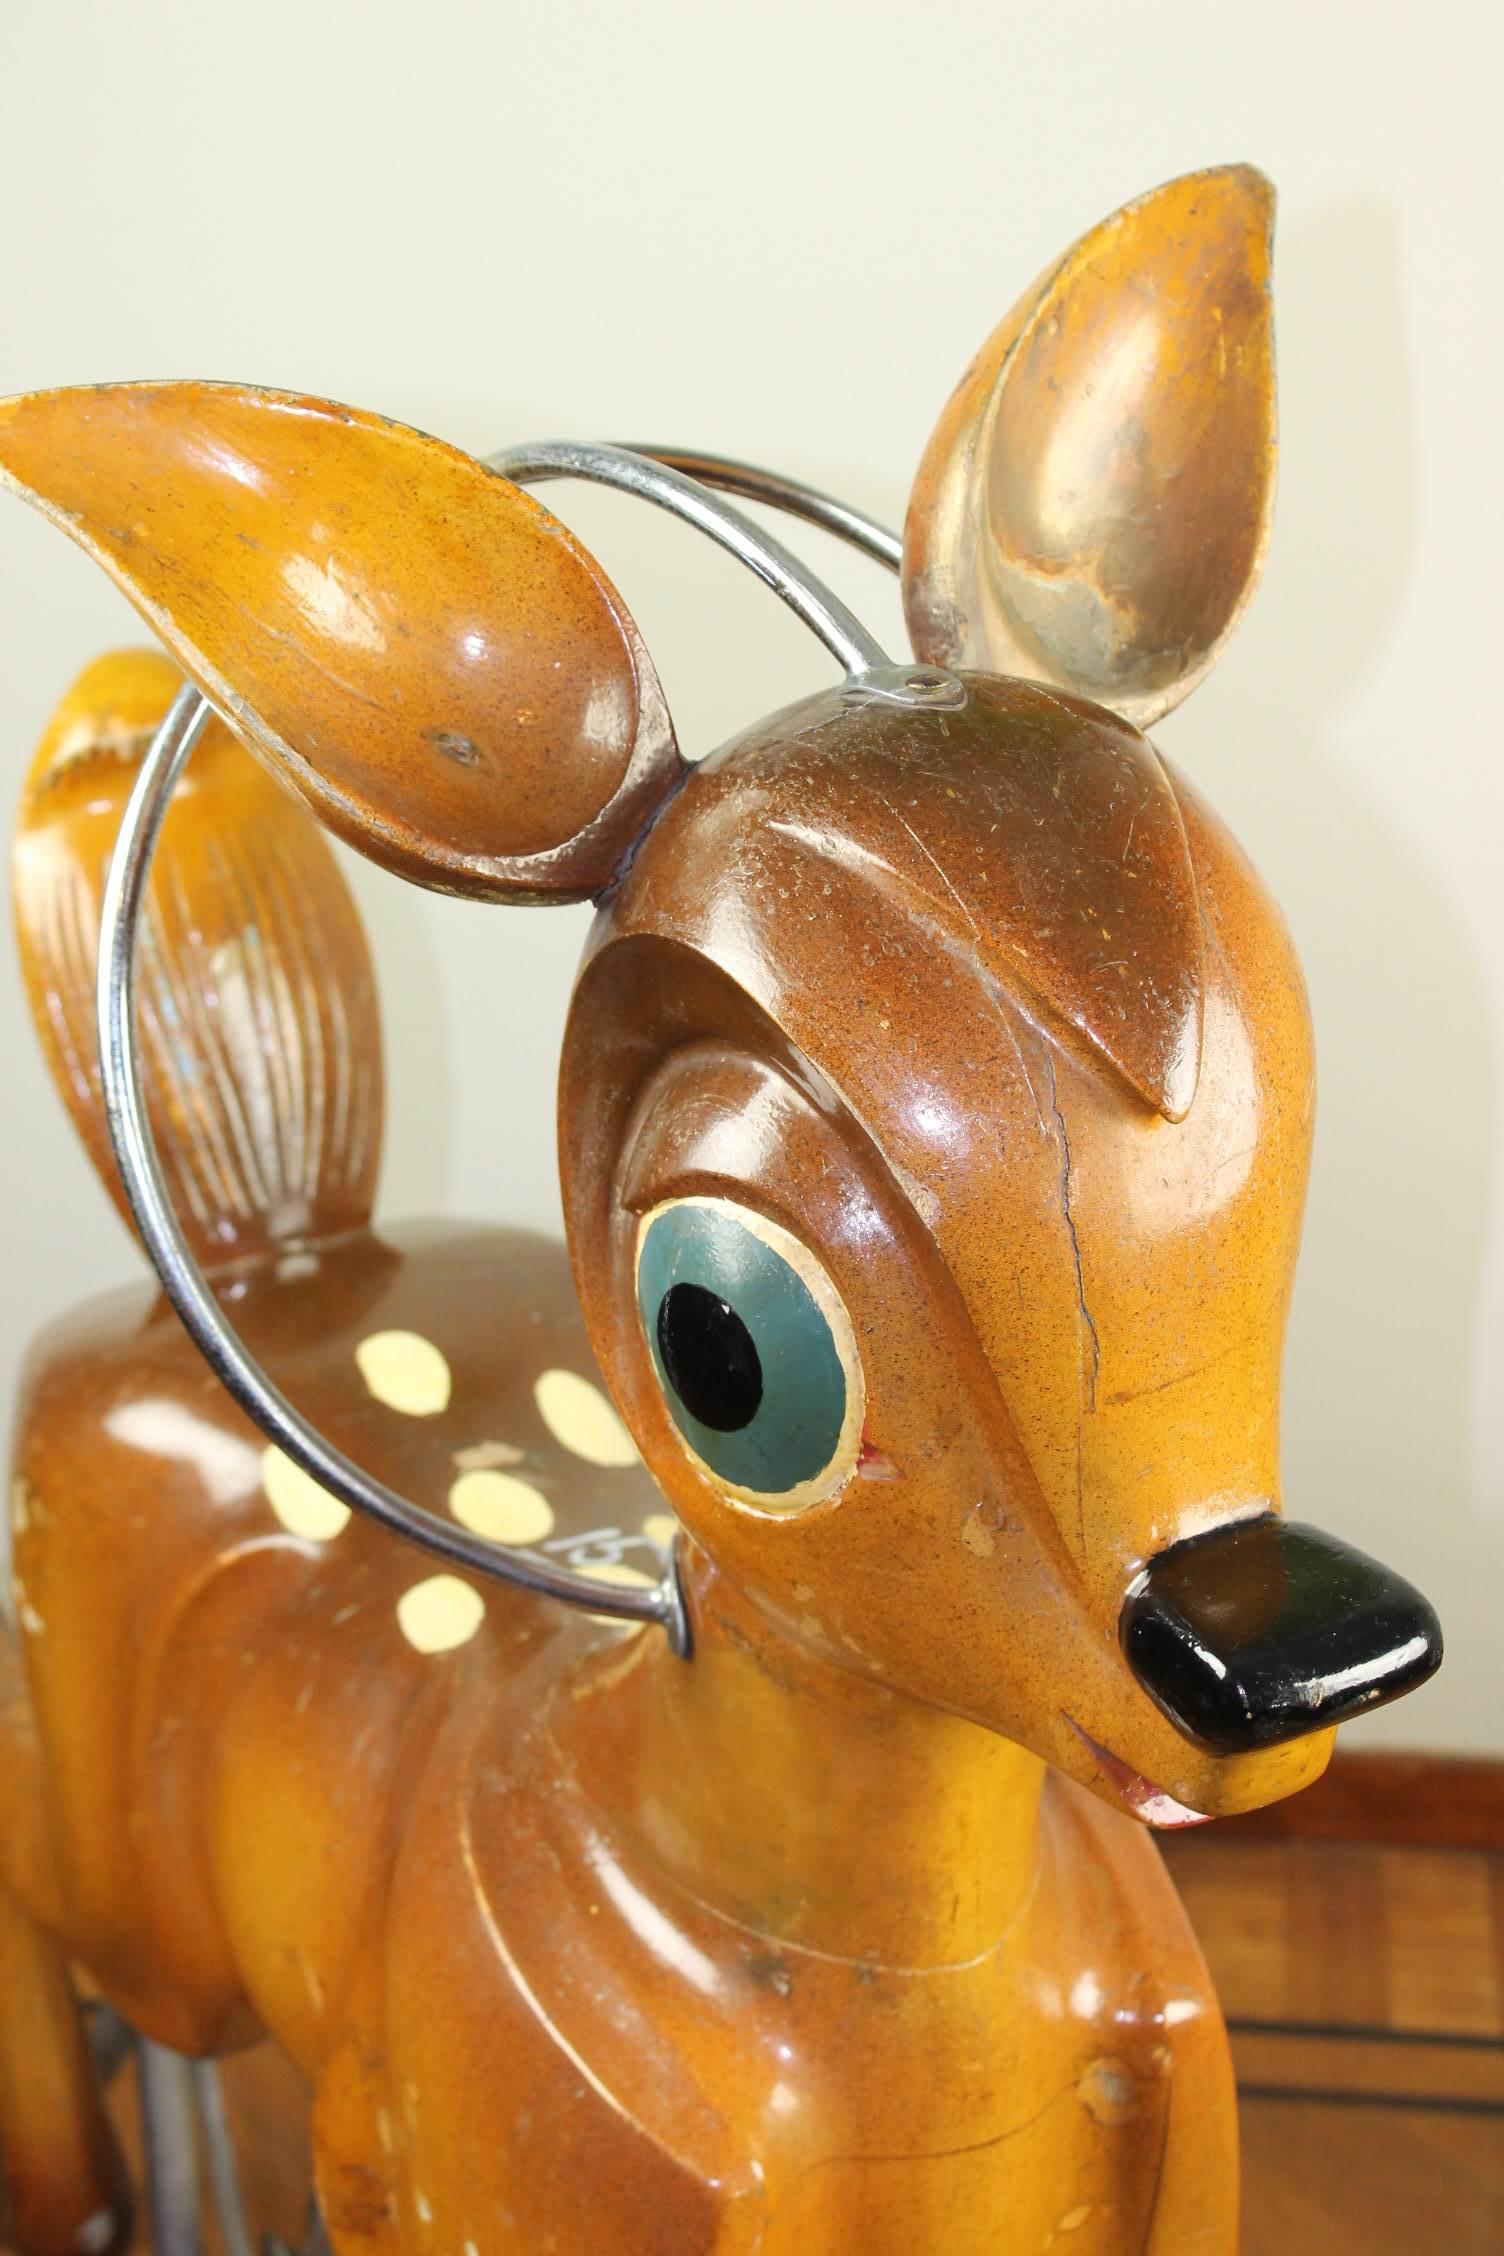 Adorable hand-carved Wooden Fairground Animal Figurine: 
Bambi , the famous white-tailed Deer Character,  known from the Disney Animation Movie and in the memory of many people . 

This Merry-go-round Sculpture is made in the 1960s by Bernard Kindt